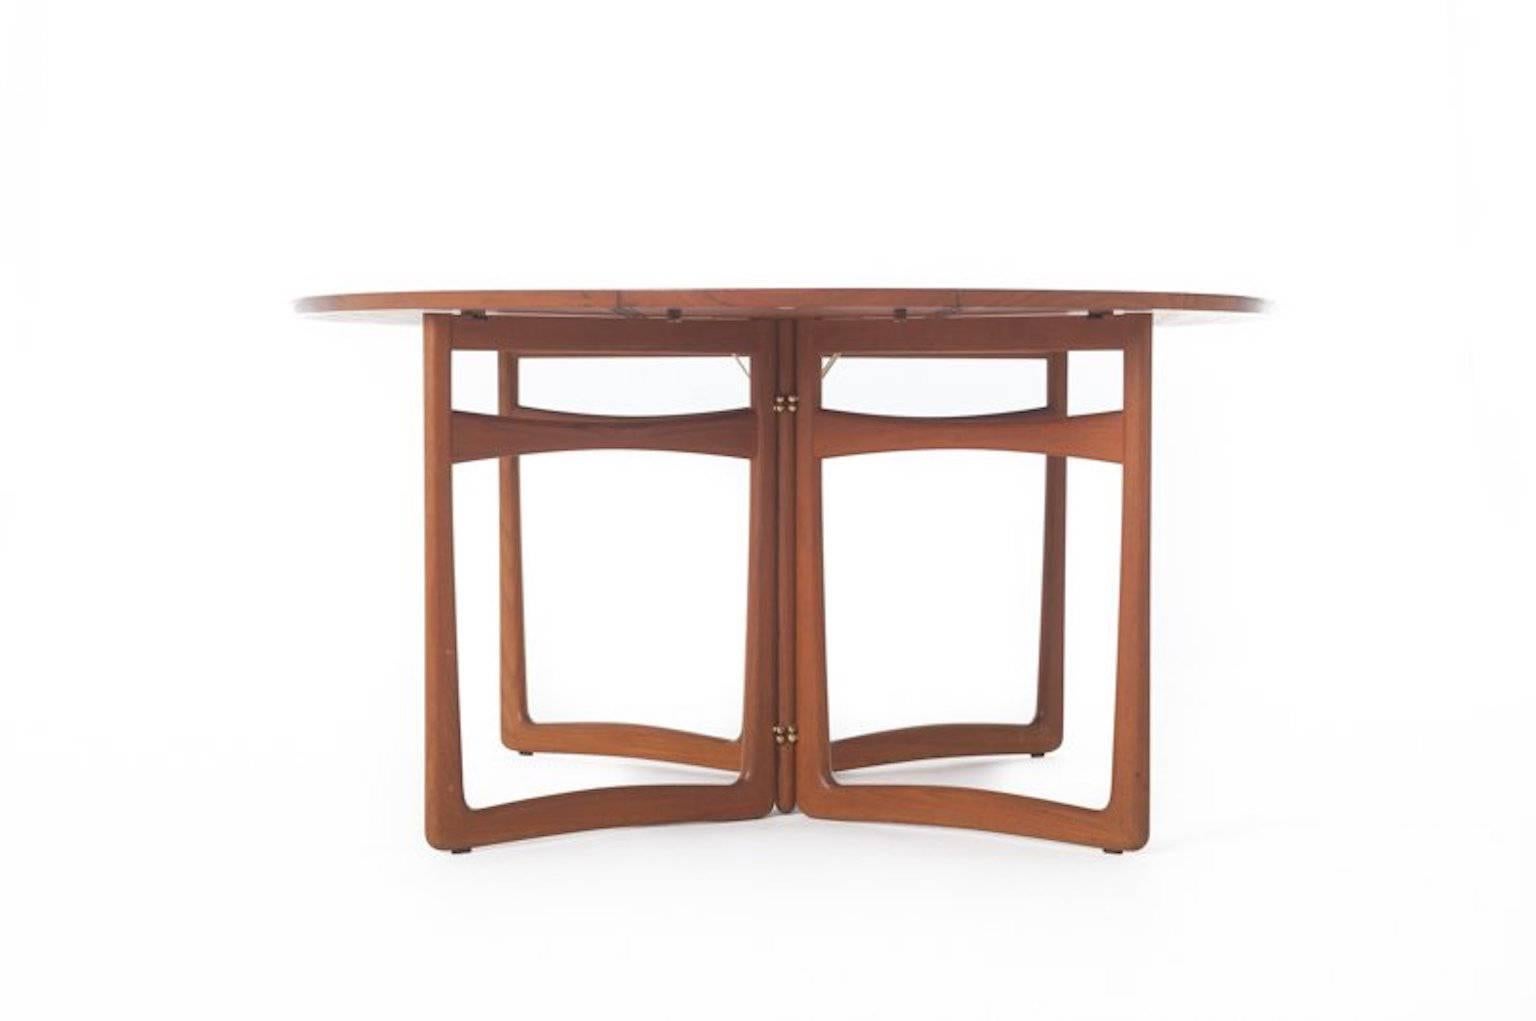 Beautiful gate leg dining table by Peter Hvidt & Orla Molgaard in teak. Leaves down to create console table.